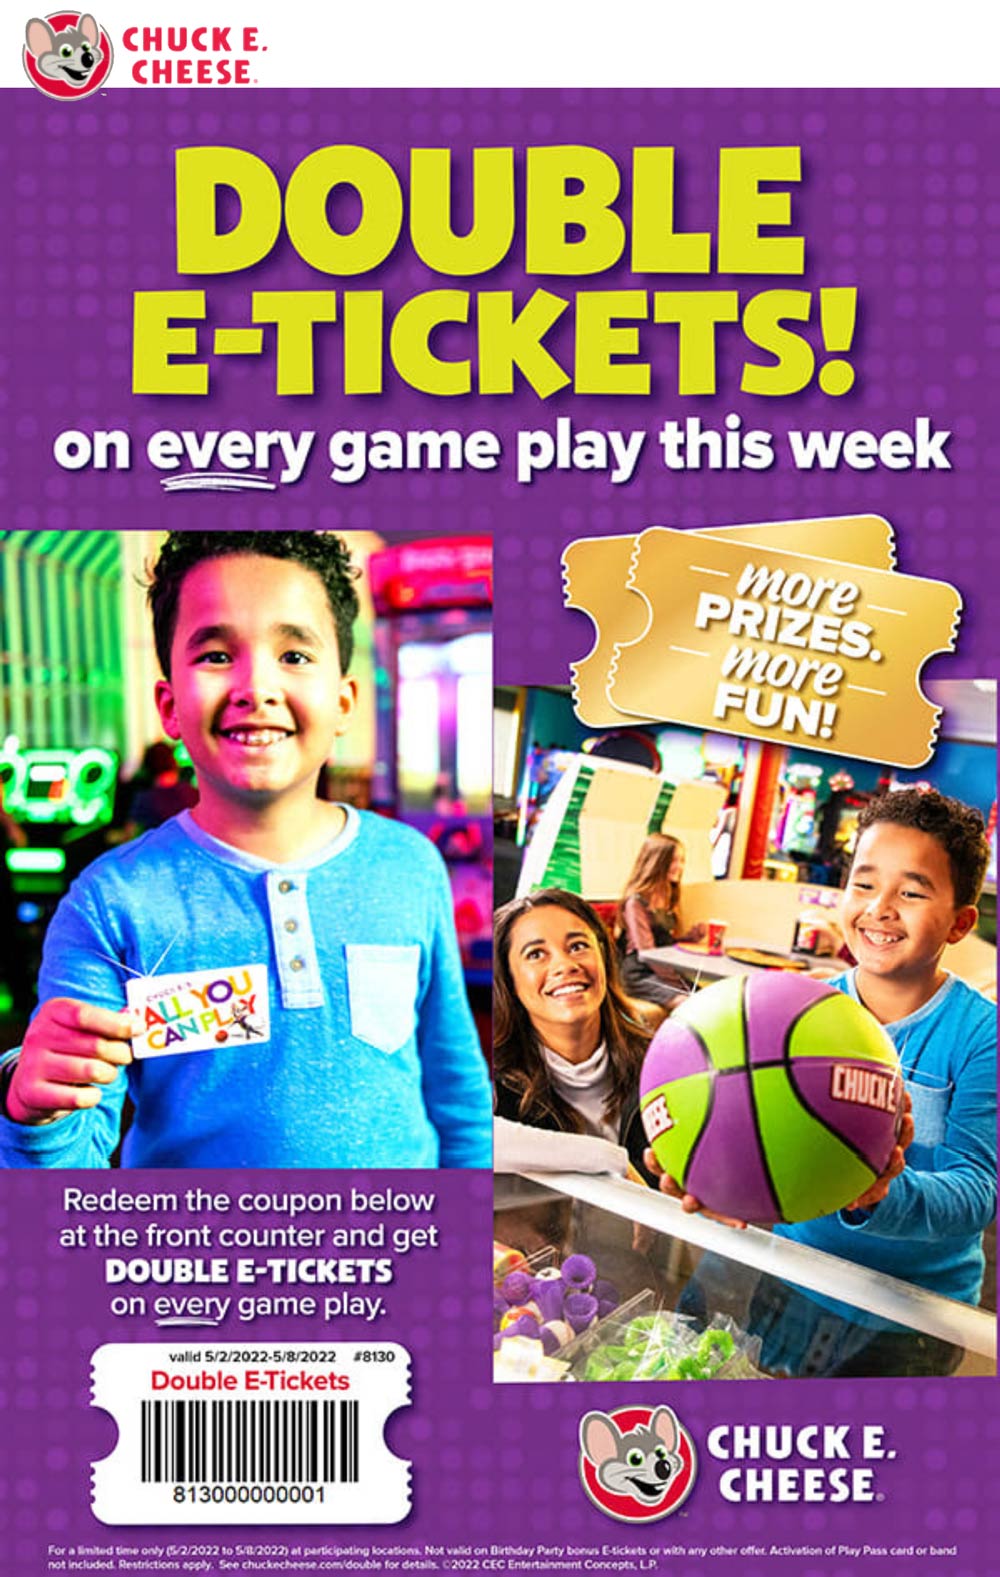 Chuck E. Cheese restaurants Coupon  Double the redemption value of prize tickets at Chuck E. Cheese pizza #chuckecheese 